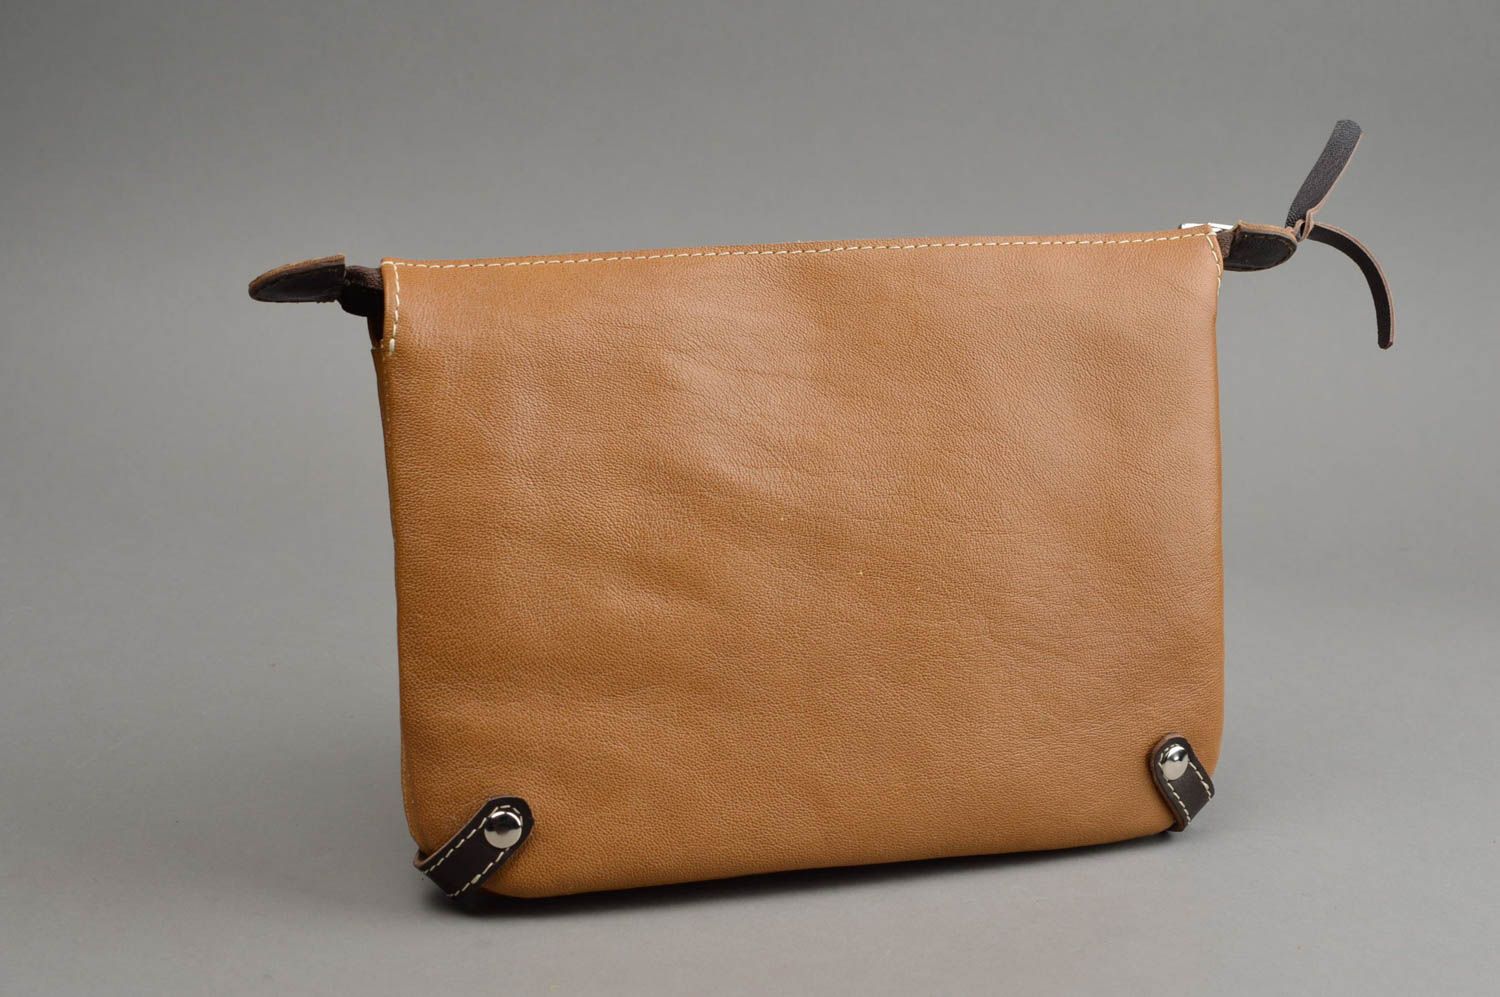 Handmade leather clutch cute bag in casual style beautiful accessories photo 3